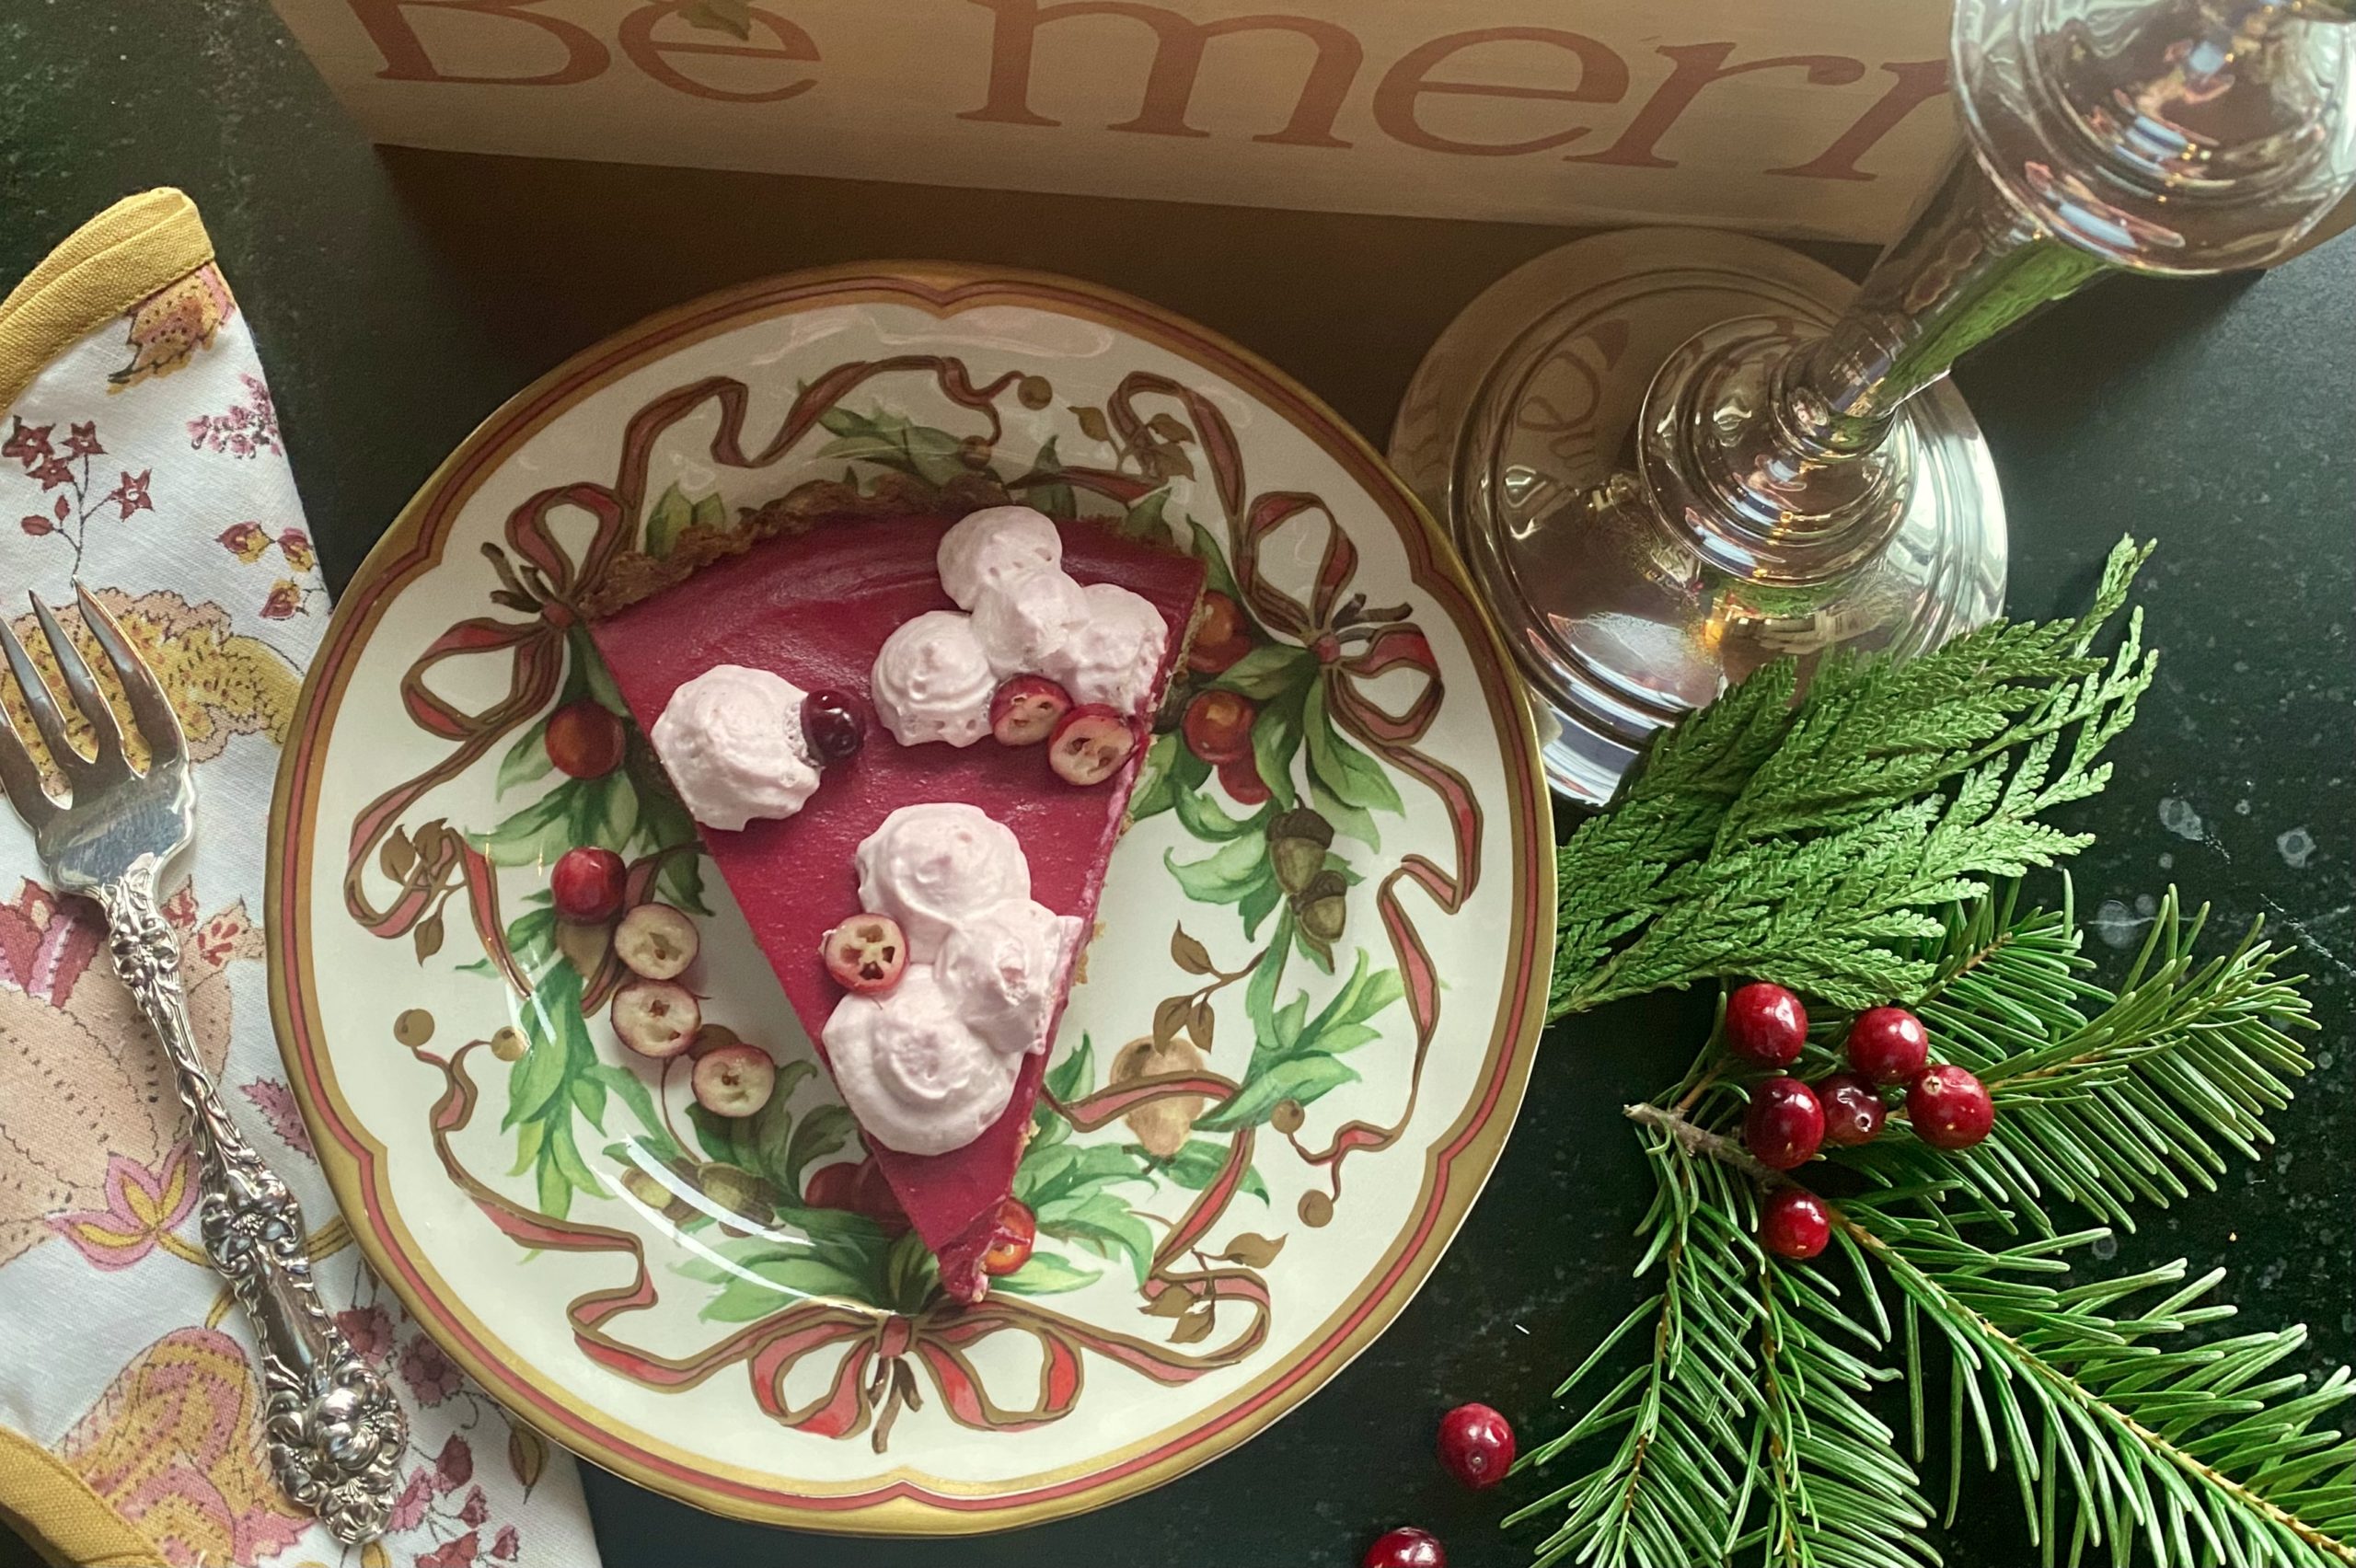 A decorative plate with a slice of cranberry tart on it